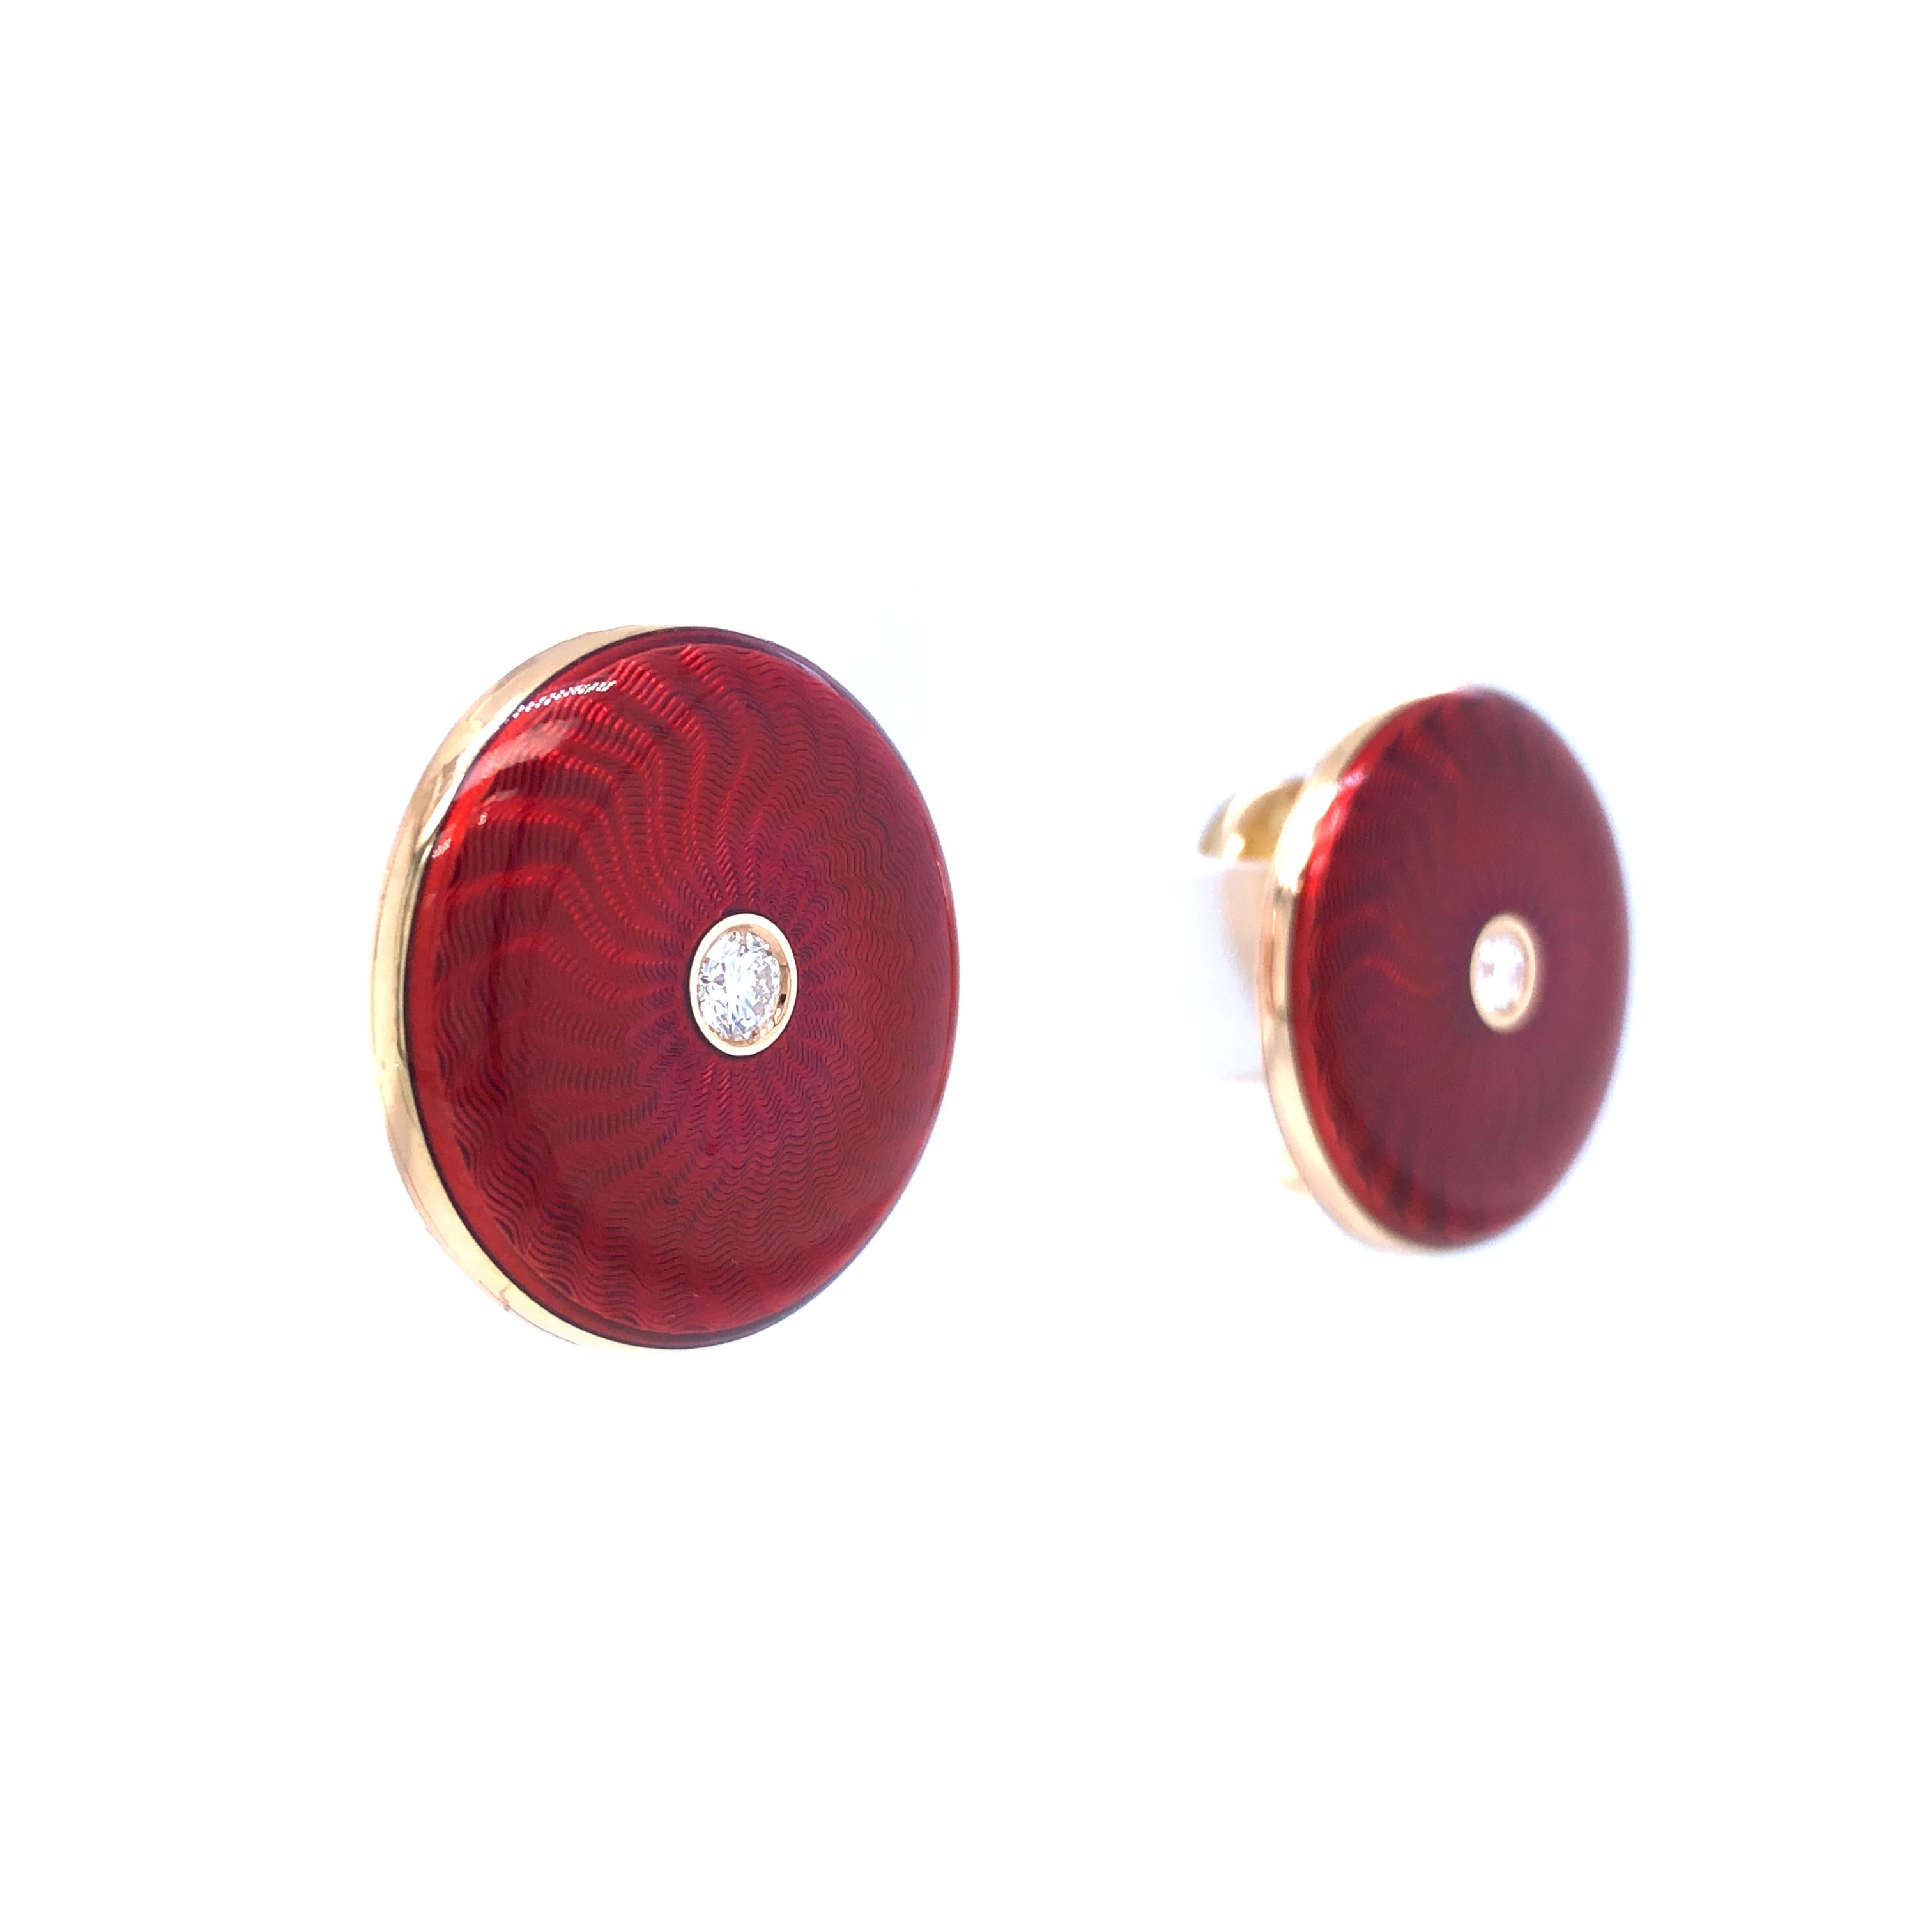 Victor Mayer round earrings 18k rose gold, Opera collection, translucent red vitreous enamel, guilloche engraving by hand,  2 diamonds, total 0,20 ct, G VS, brilliant cut, diameter app. 21.4 mm

About the creator Victor Mayer
Victor Mayer is